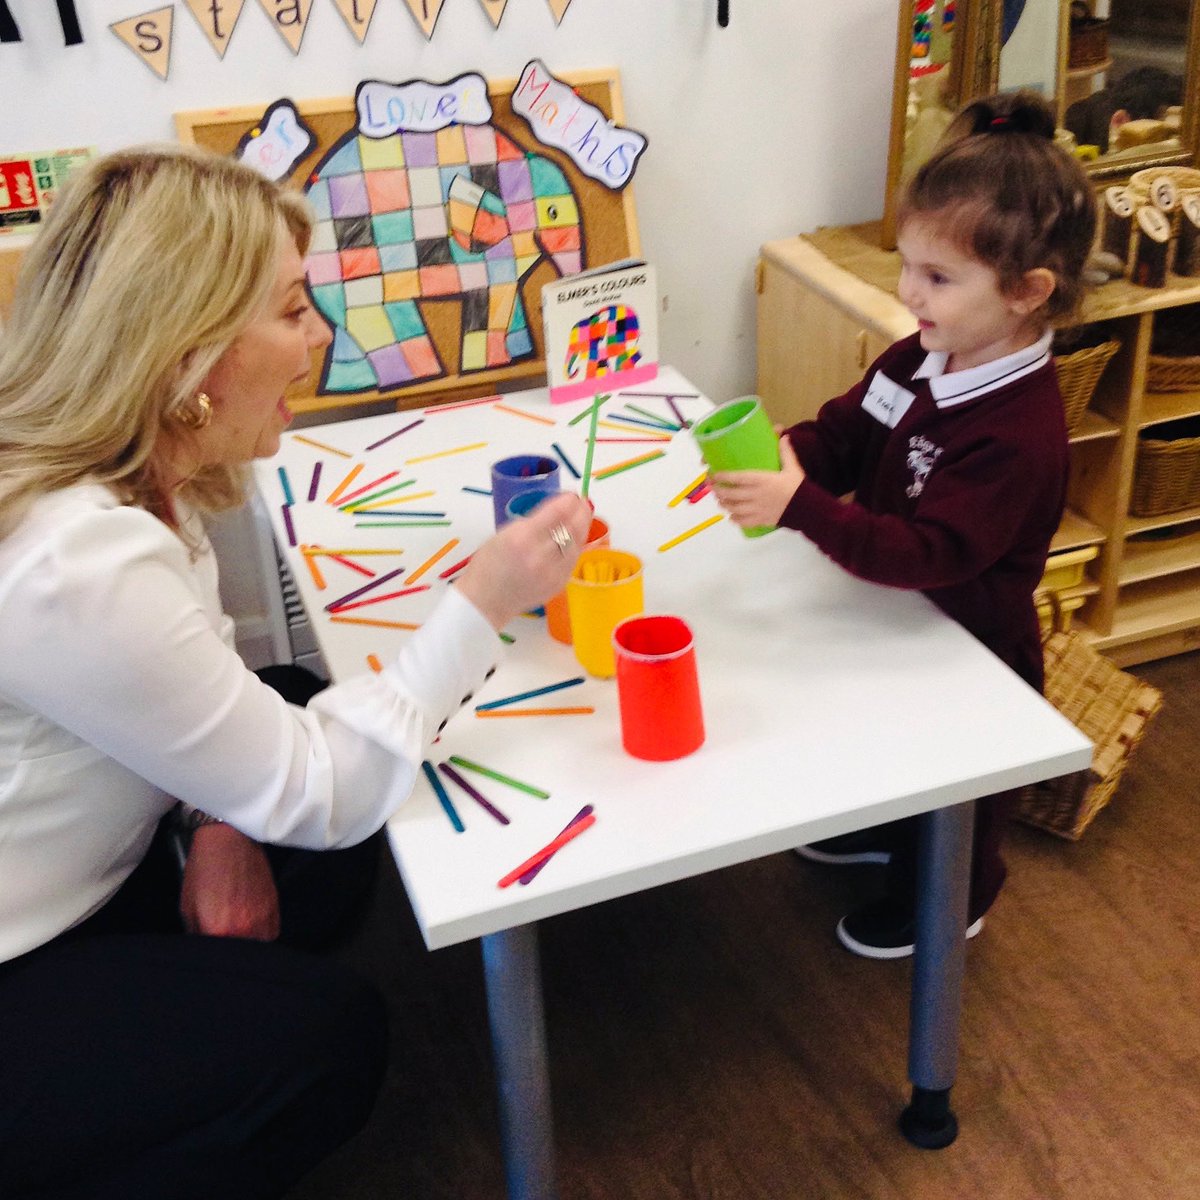 A wonderful first day at school for our new pre schoolers. @EdgeGrove #flourish #inquisitiveminds #earlyyears